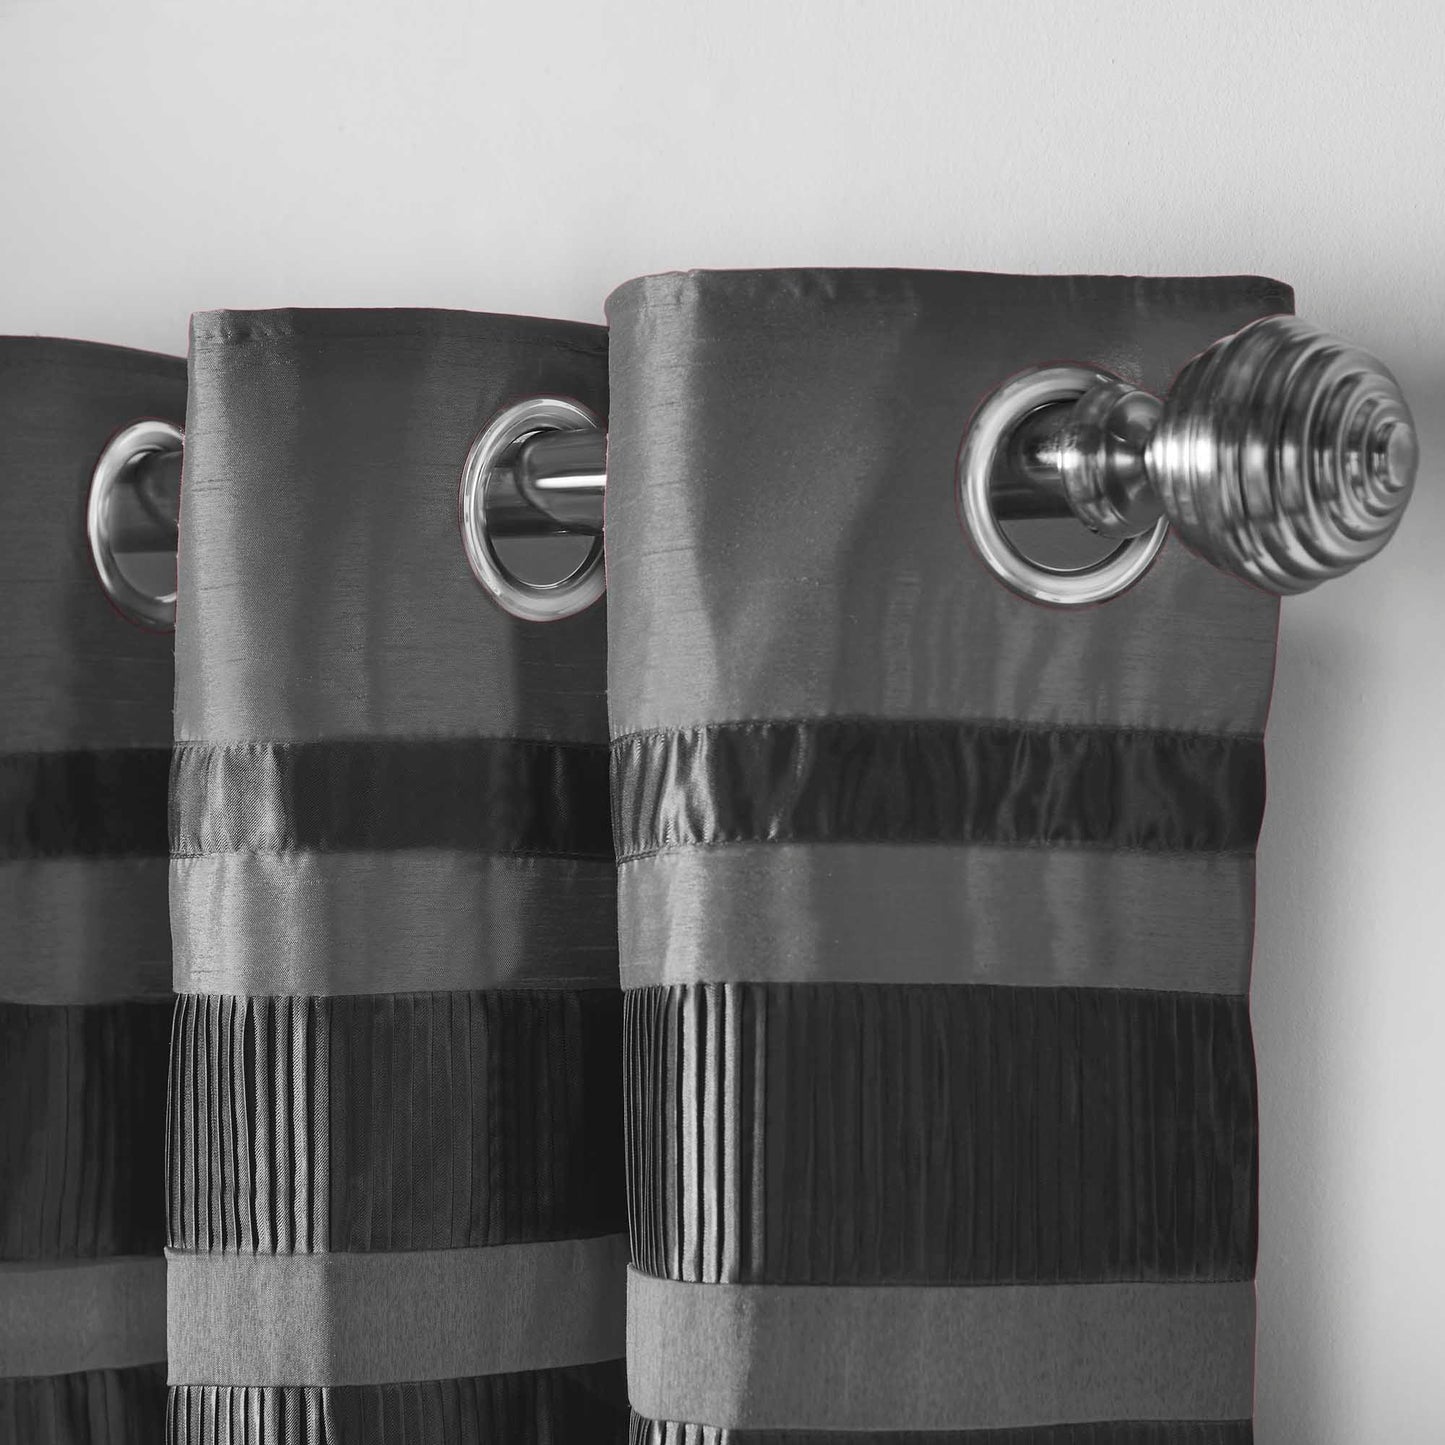 Denver Lined Eyelet Curtains - Charcoal